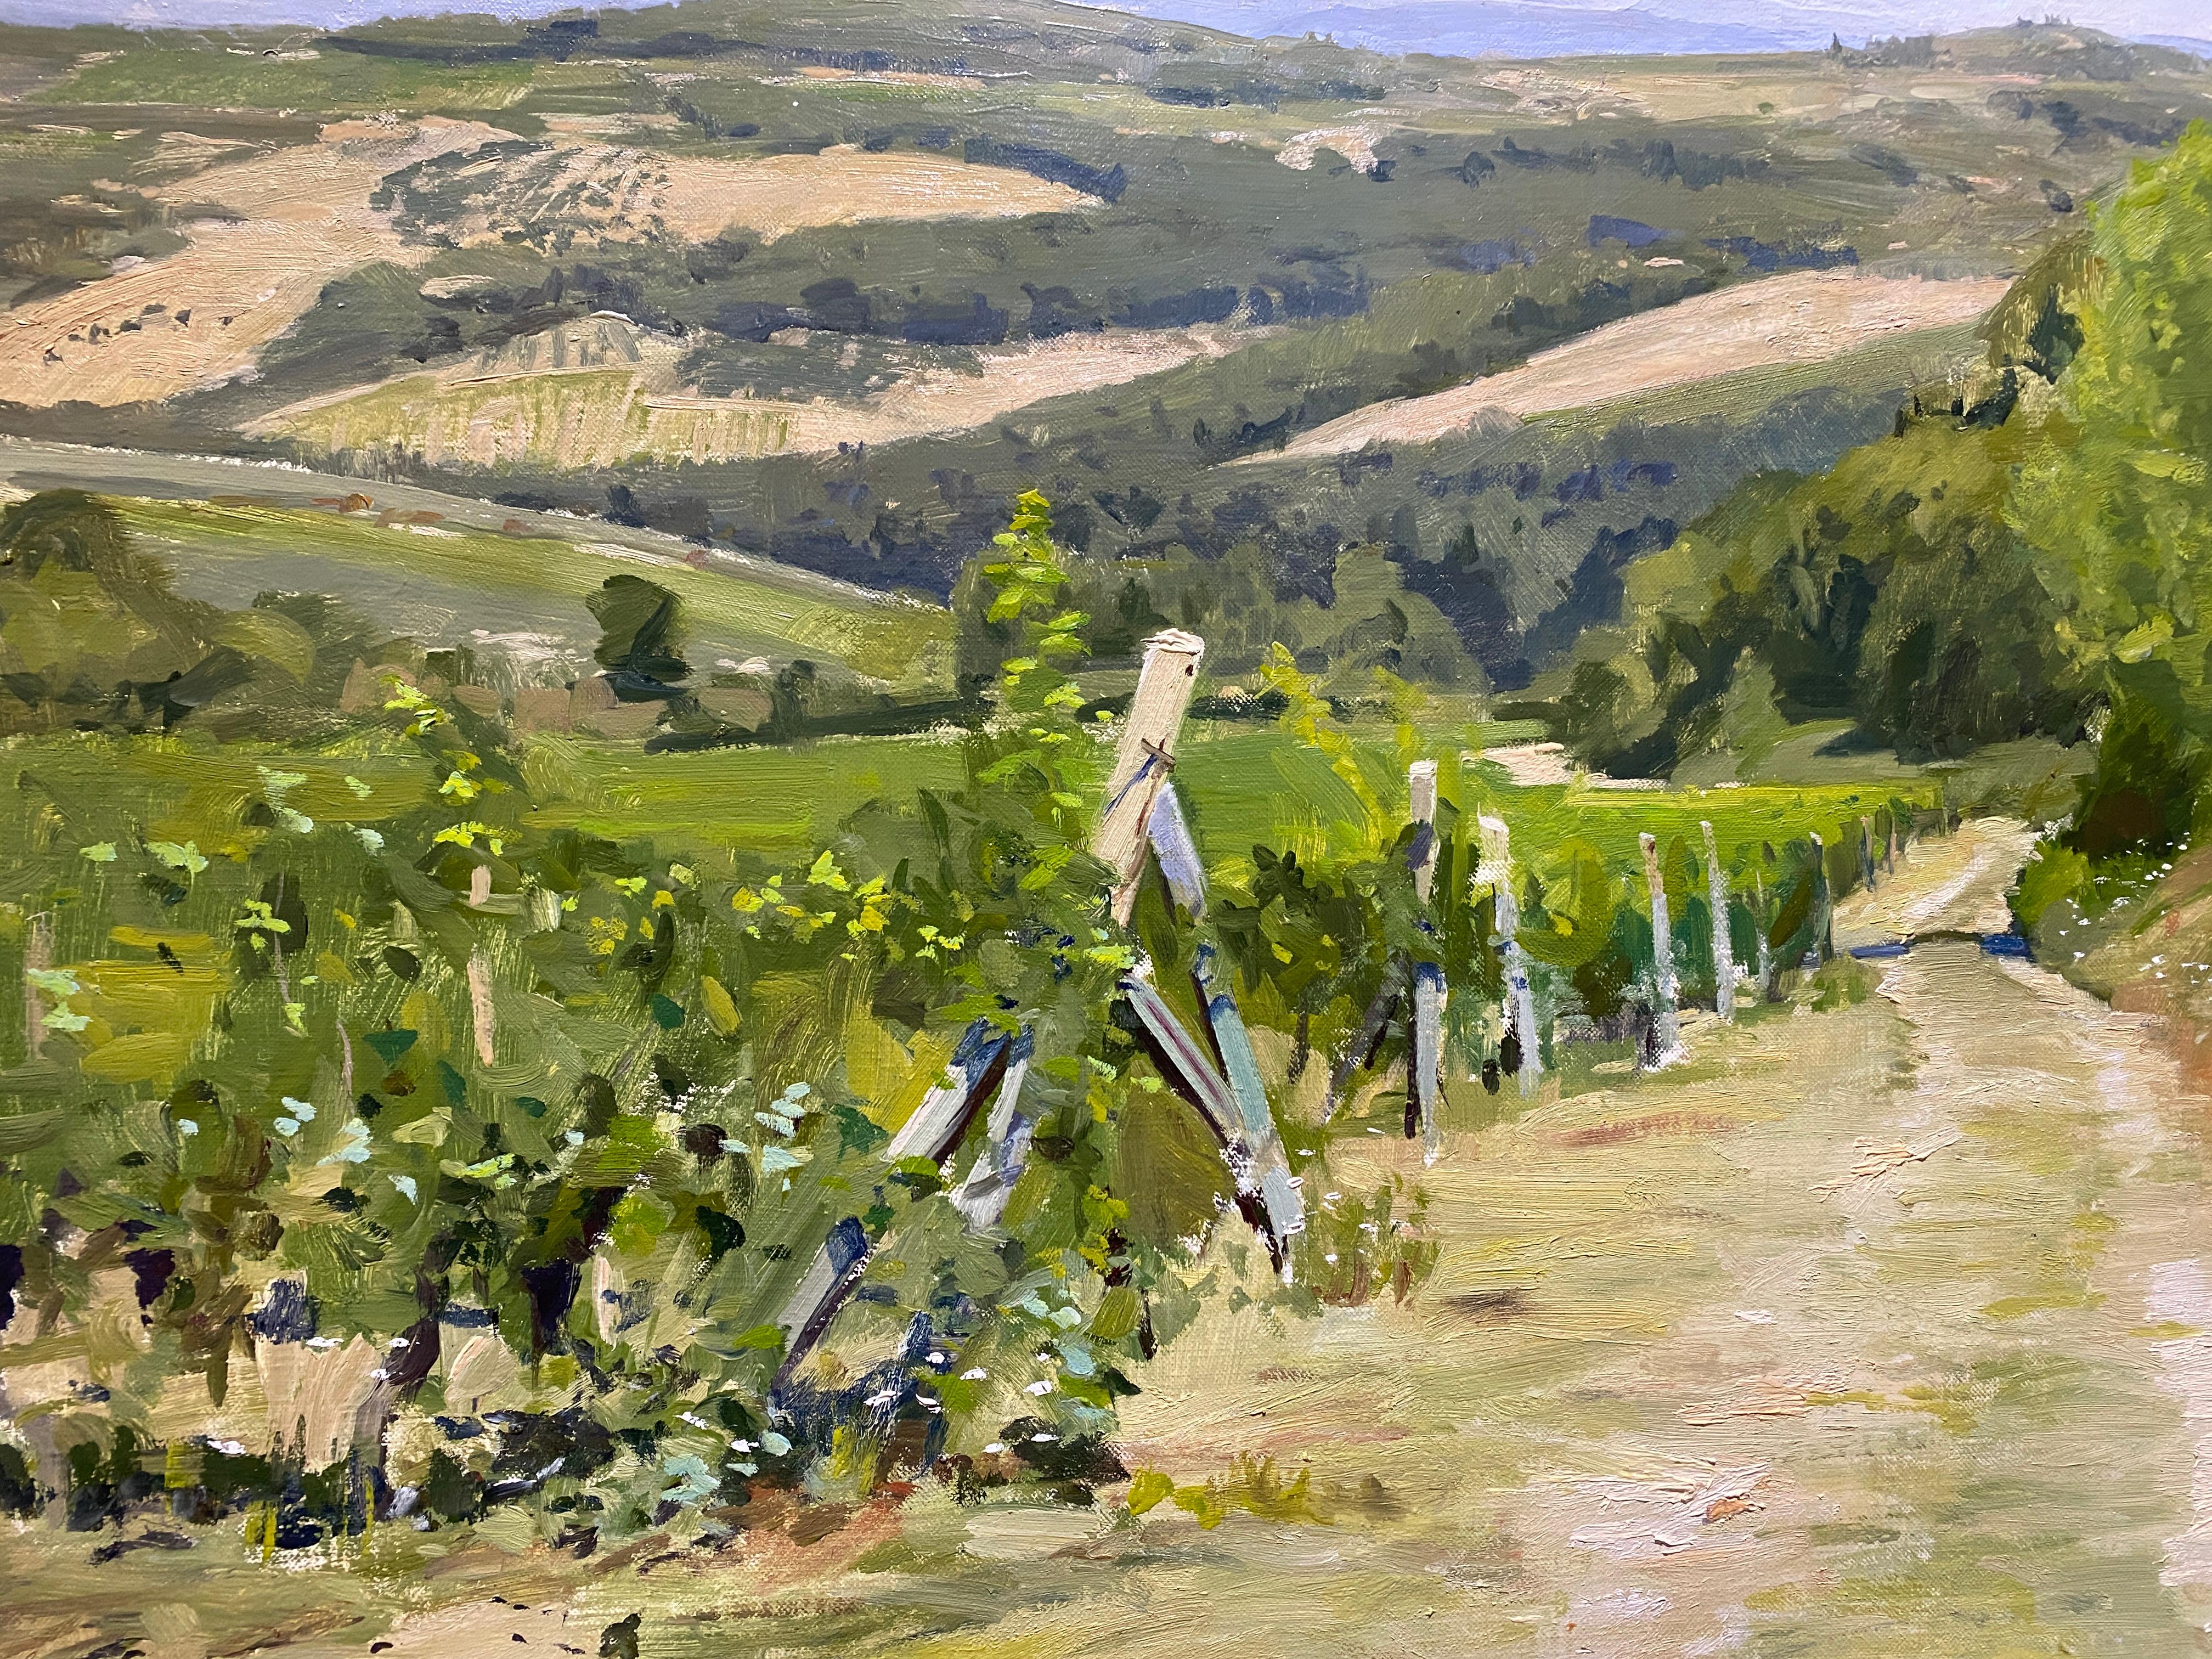 An oil painting by American plein-air painter Marc Dalessio. A  depiction of the rolling hills of Tuscany. Cultivated nature lives on the left with the vineyard organized with fenceposts, while wildflowers grow freely on the right in dashes of white